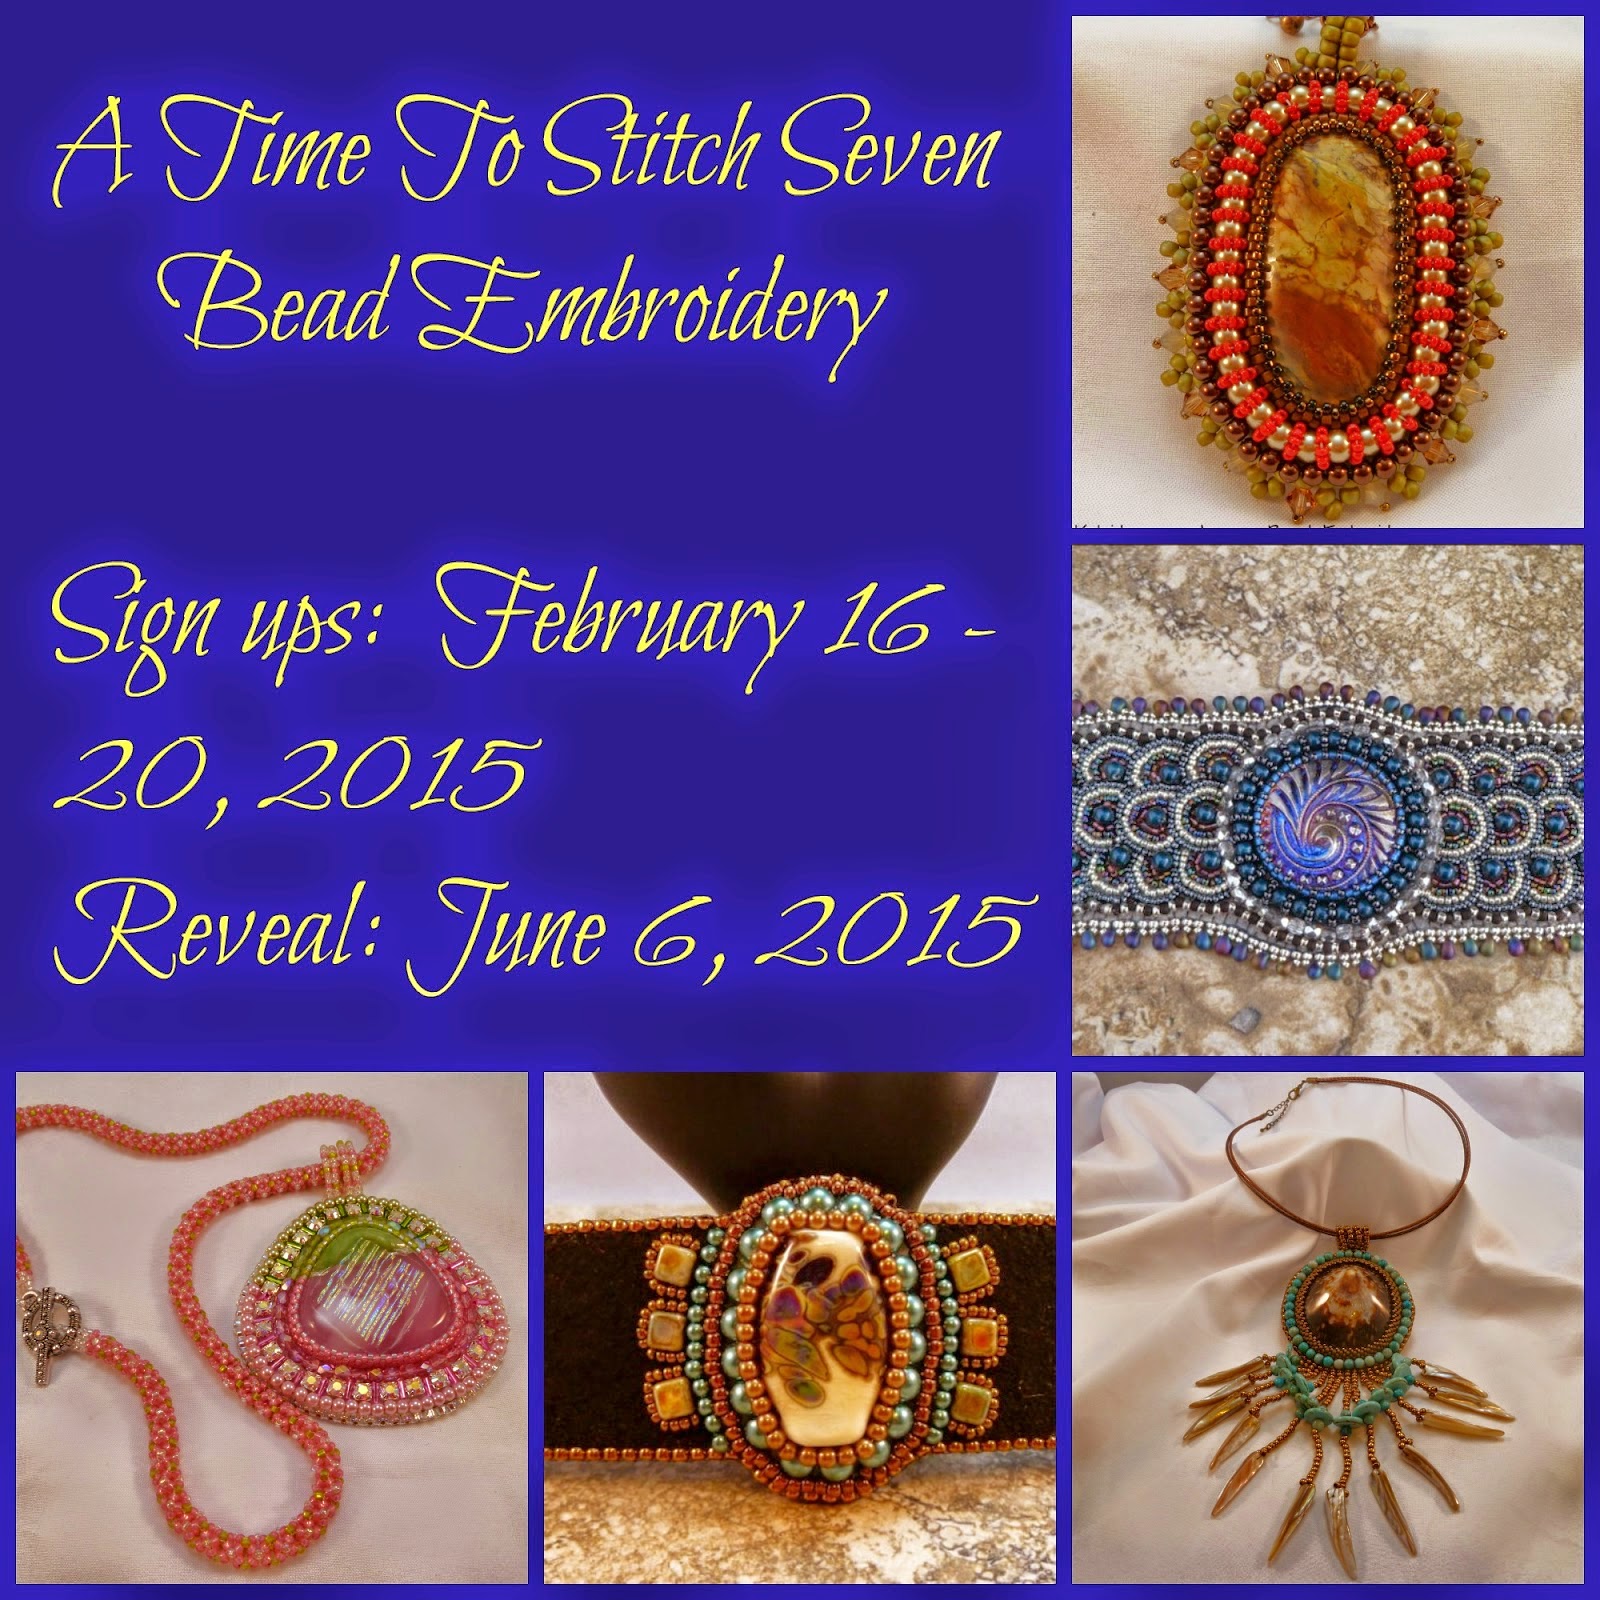 A Time to Stich Seven - Bead Embroidery